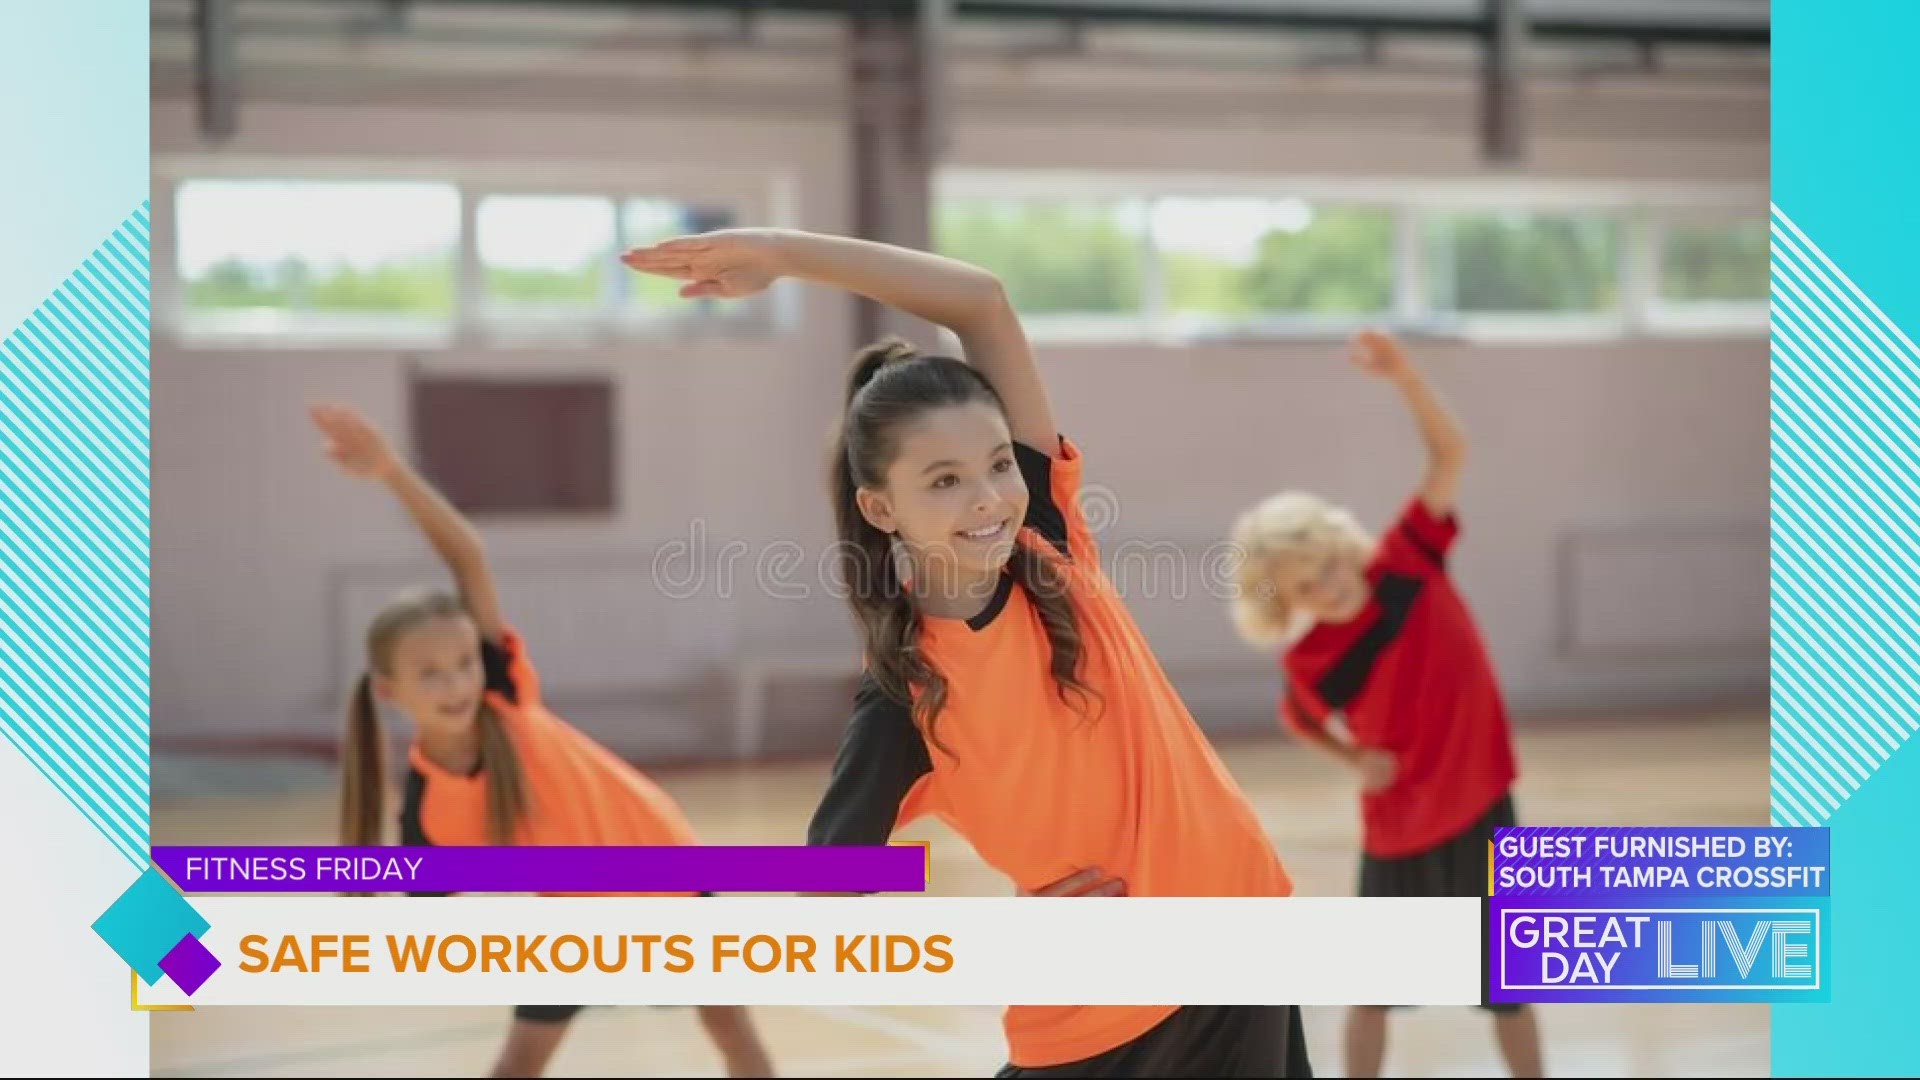 Fitness Friday: Safe workouts for kids